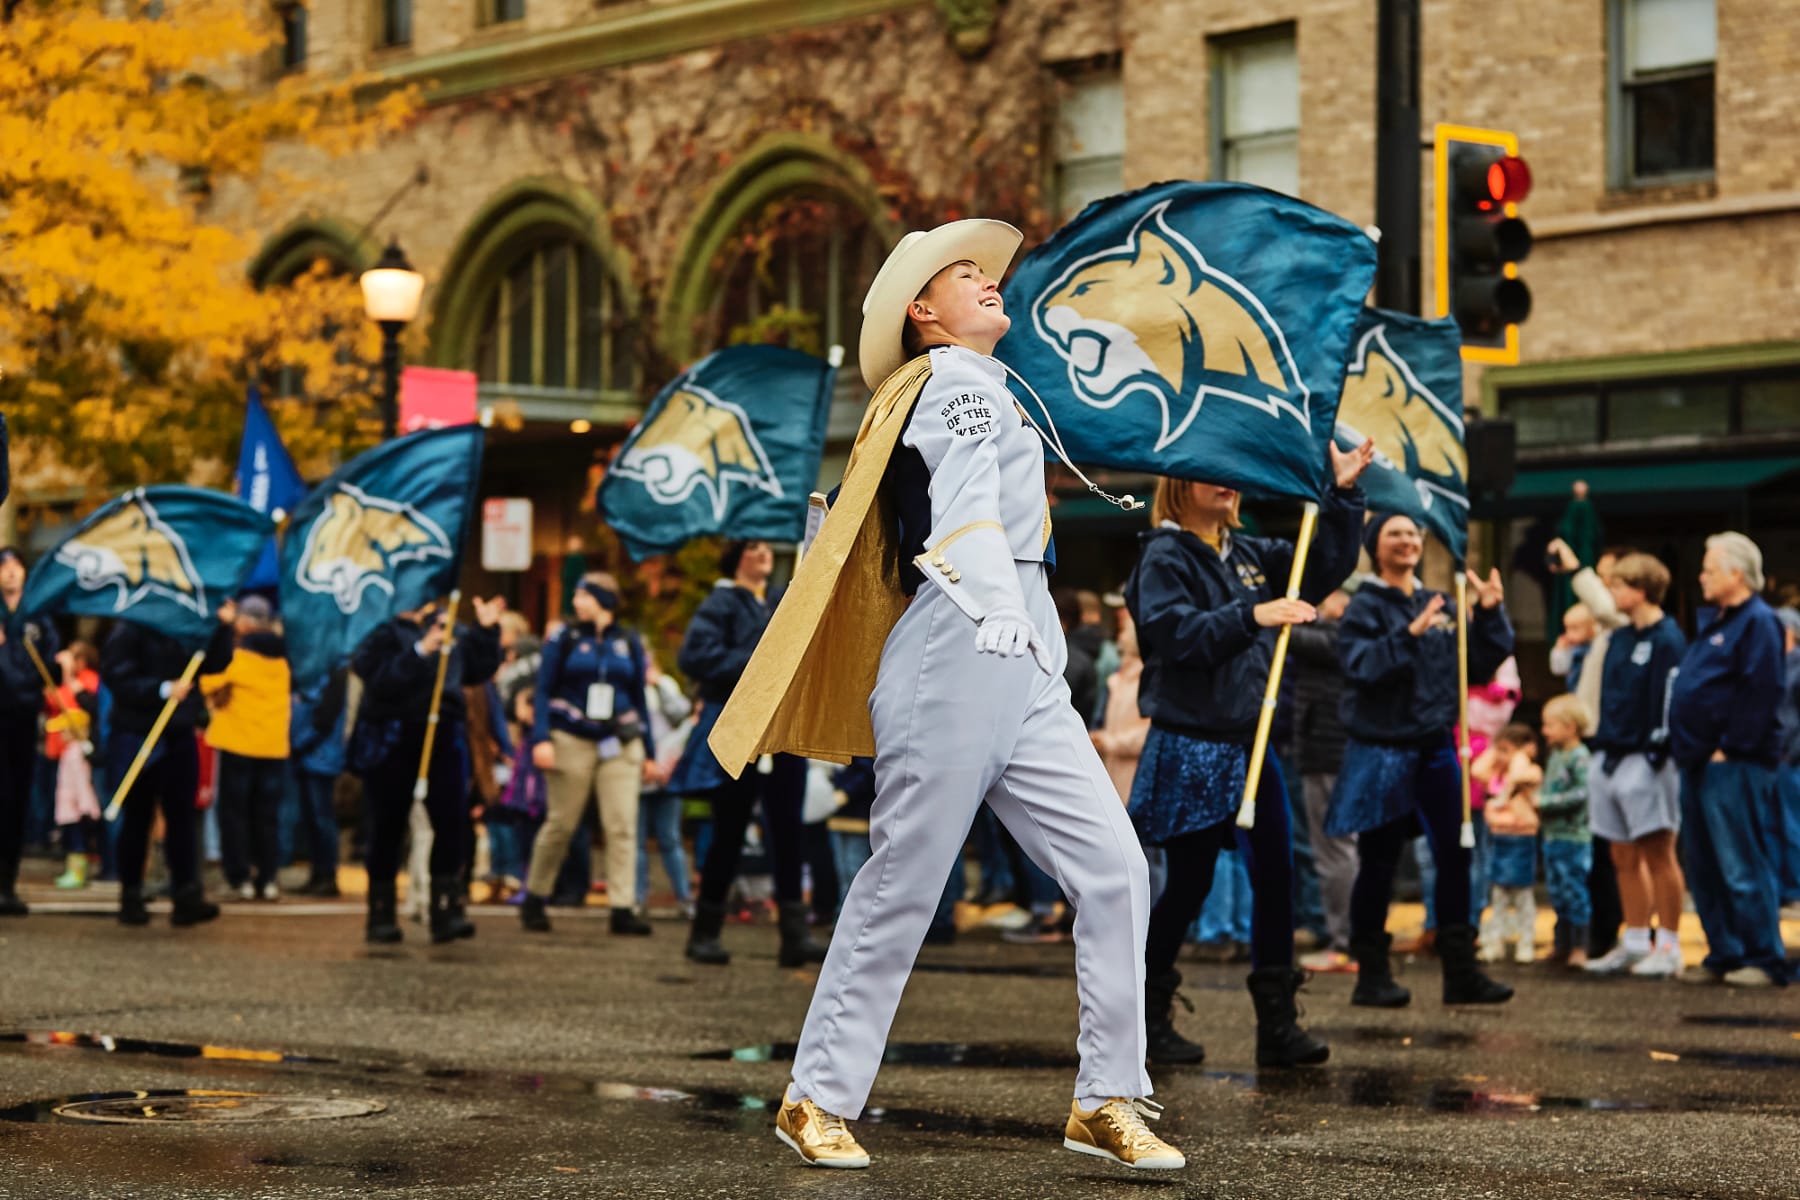 People walk down a wet city street carrying flags in a homecoming parade.